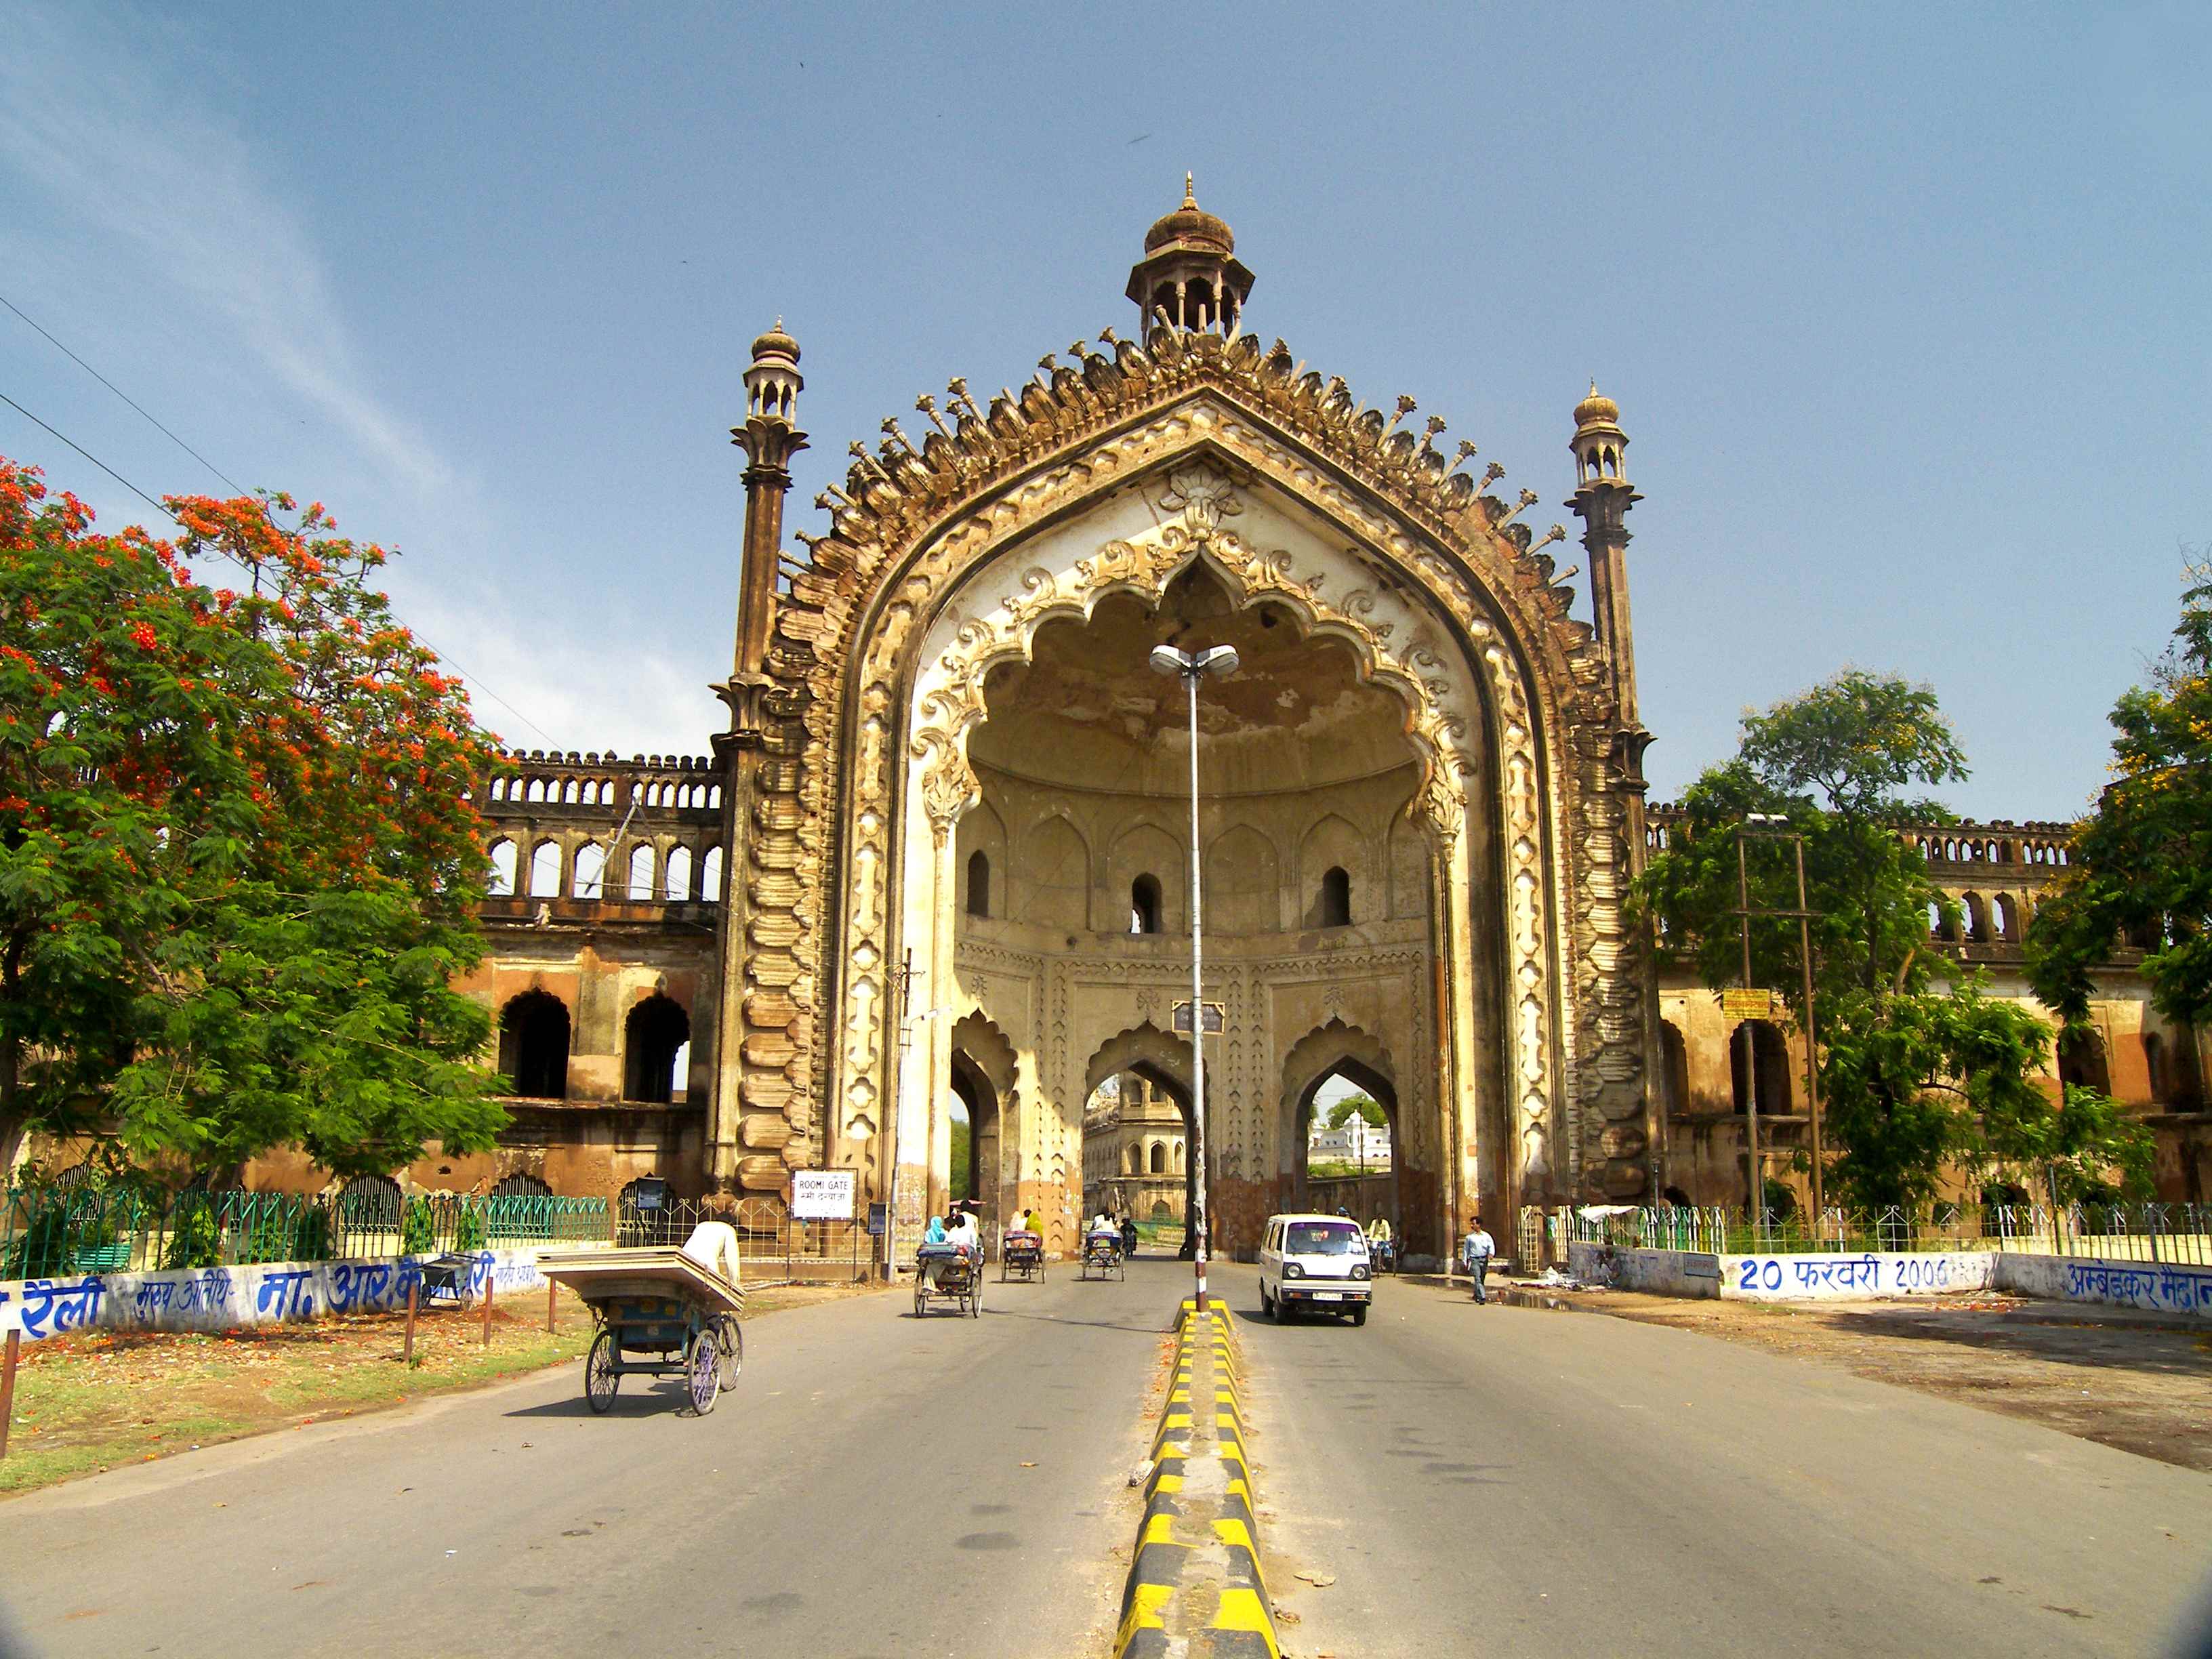 Lucknow Tops The Fast-Track Smart Cities List These Are The 12 Other Cities That Made the Cut